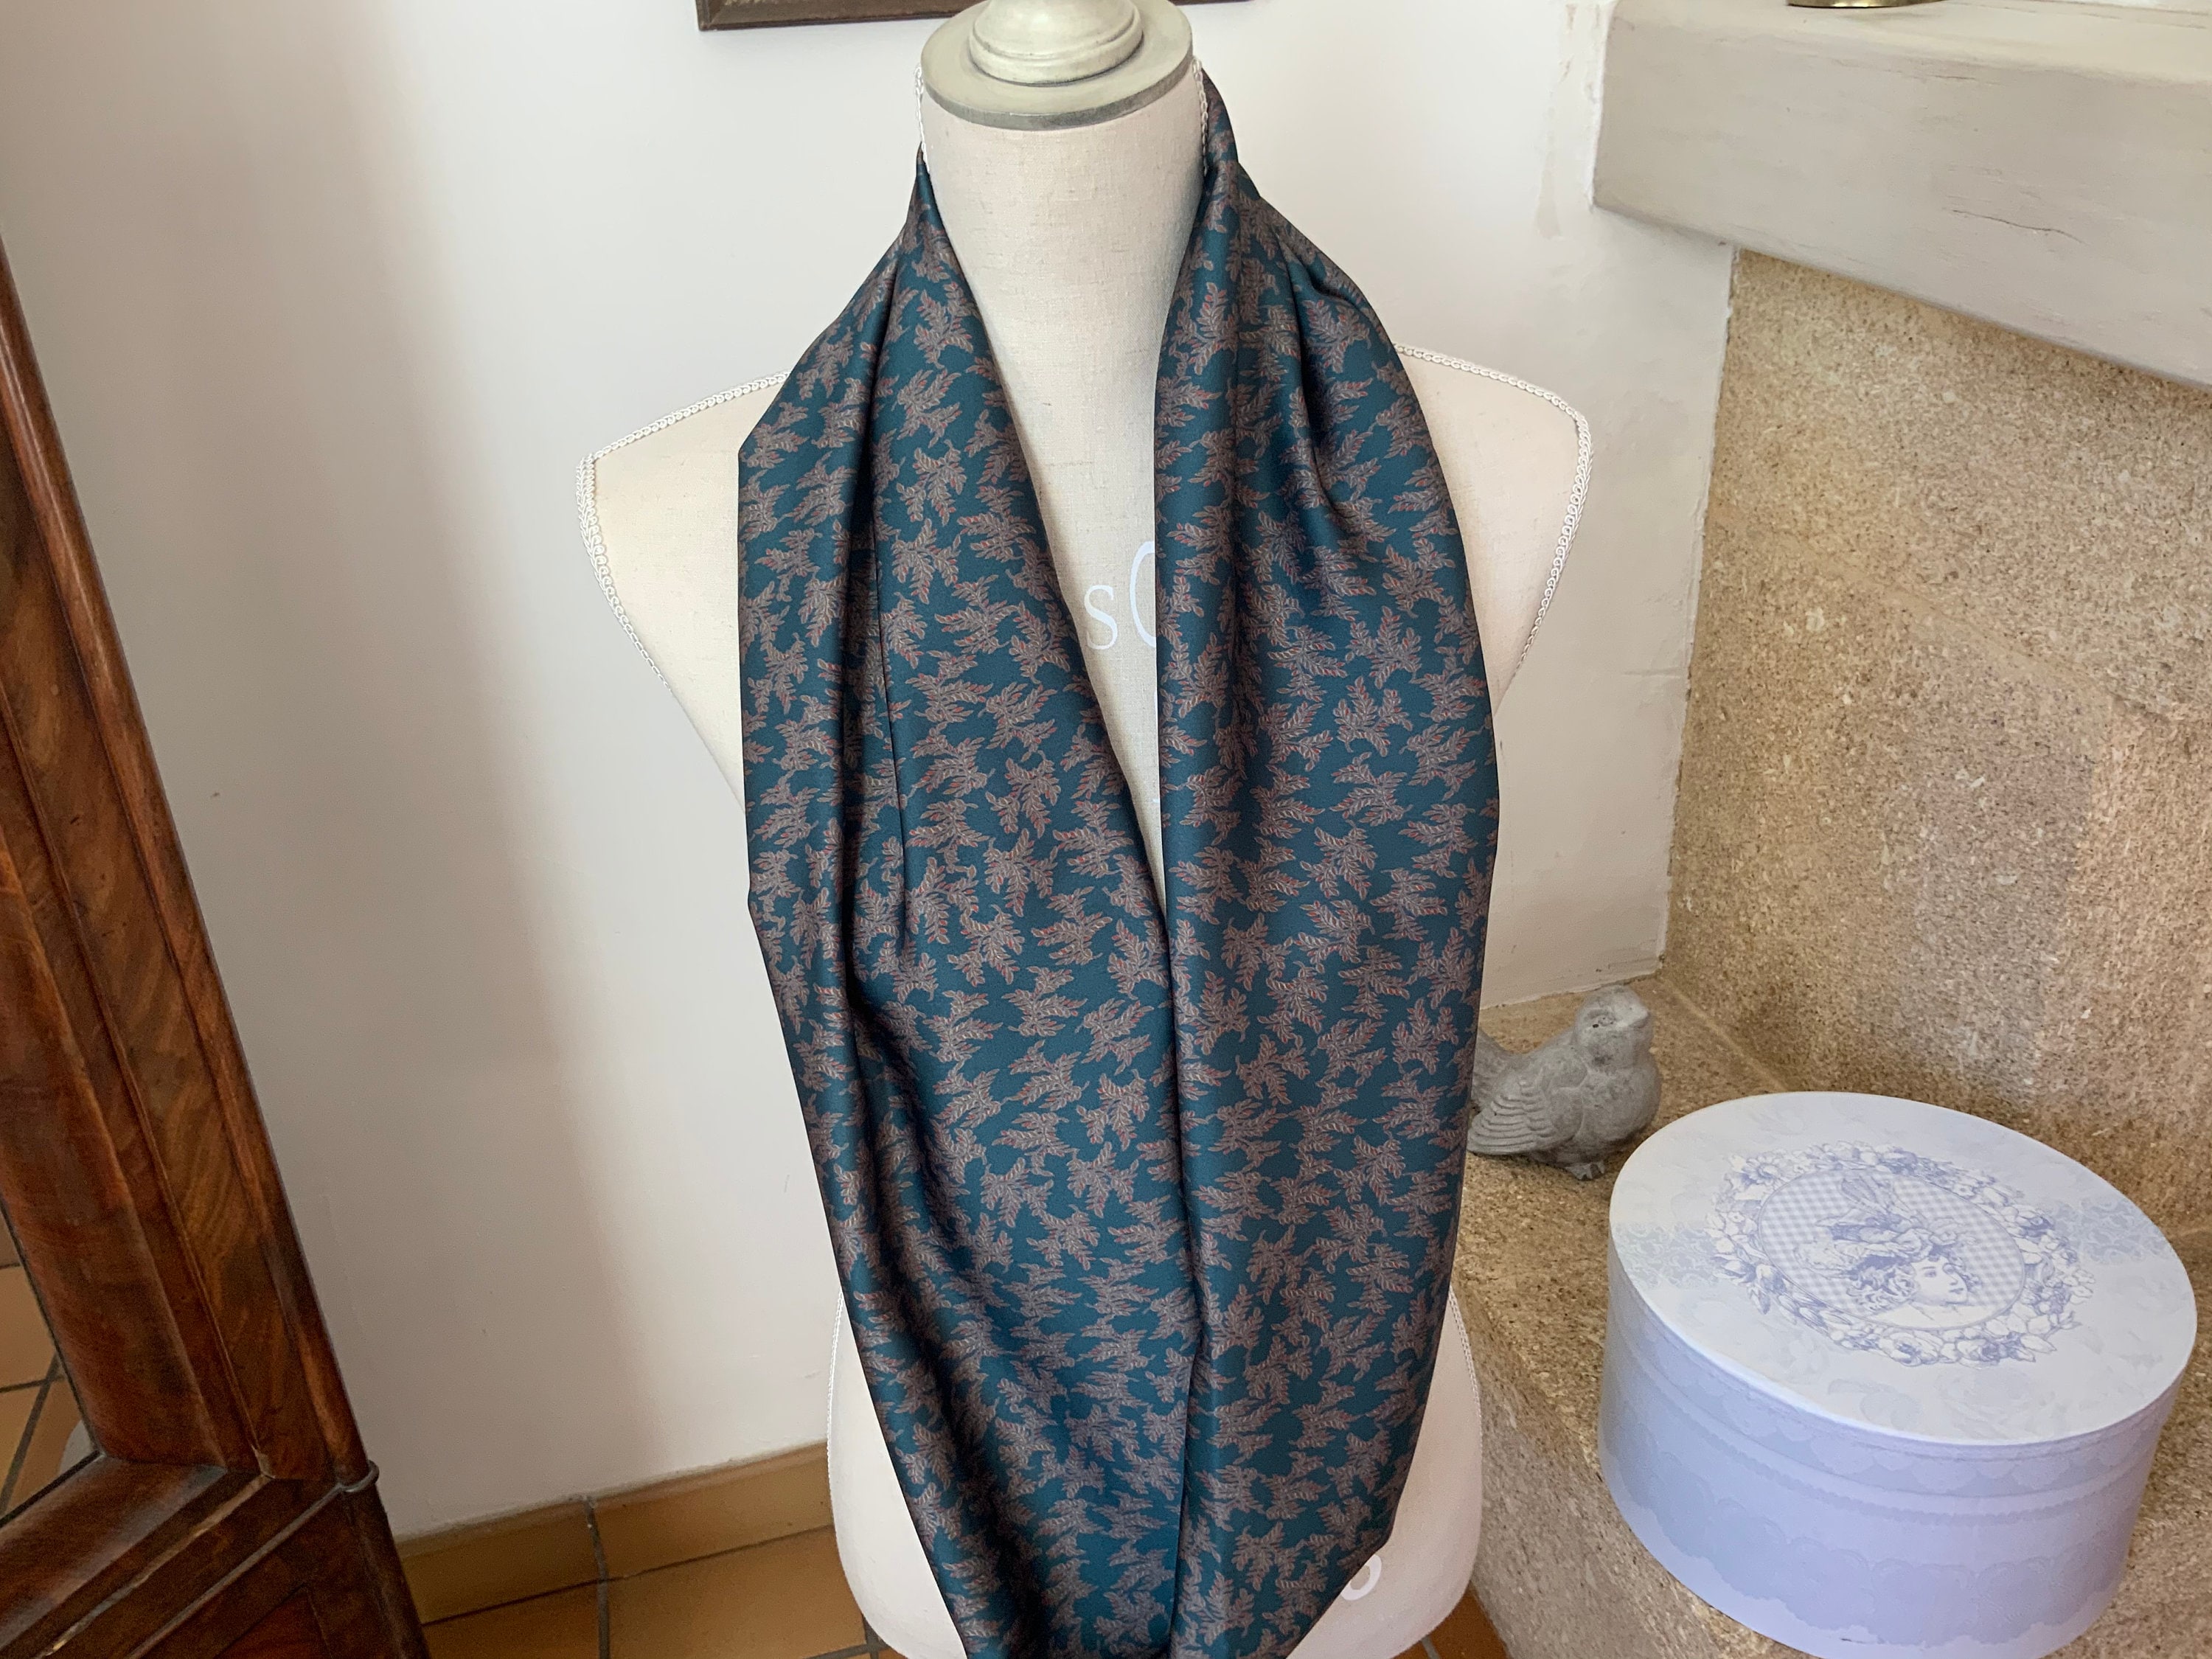 Printed polyester Snoodsatinblue ducksmall beige and coralfluidlook and touch silkfashion accessoryscarf